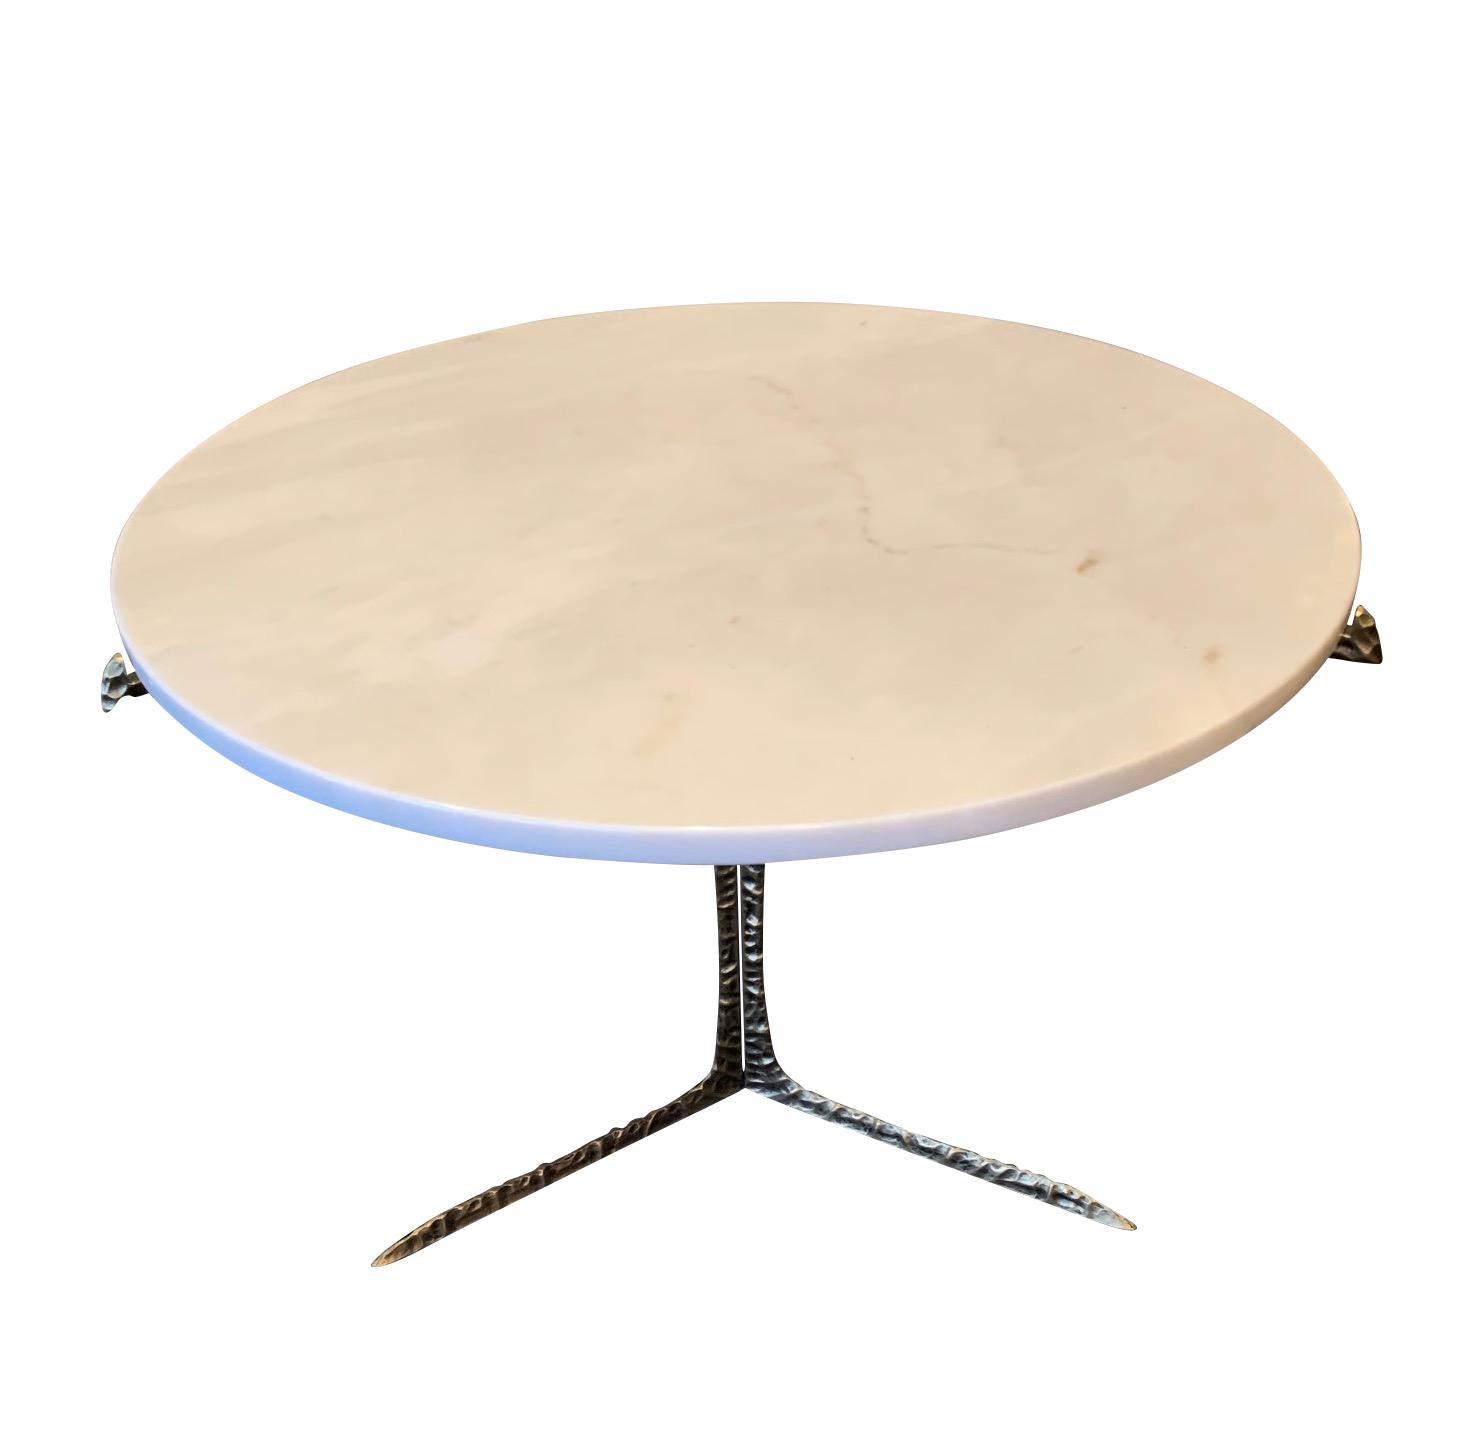 Thick round marble top coffee table
Hammered brass tripod legs
Also available with a lucite top (F2620).